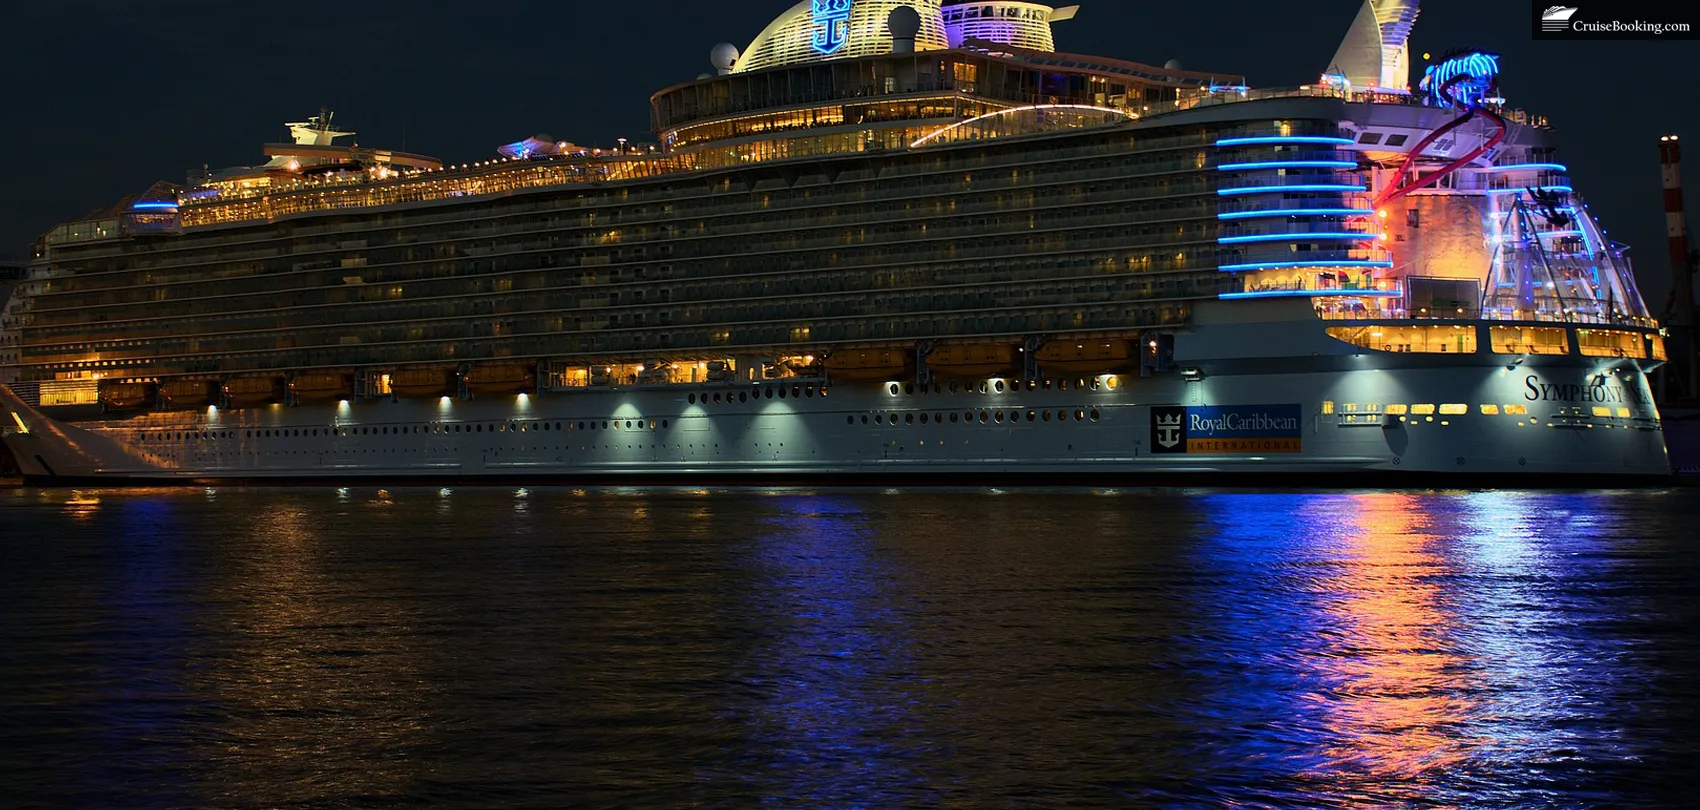 North American consumers are strong for Royal Caribbean